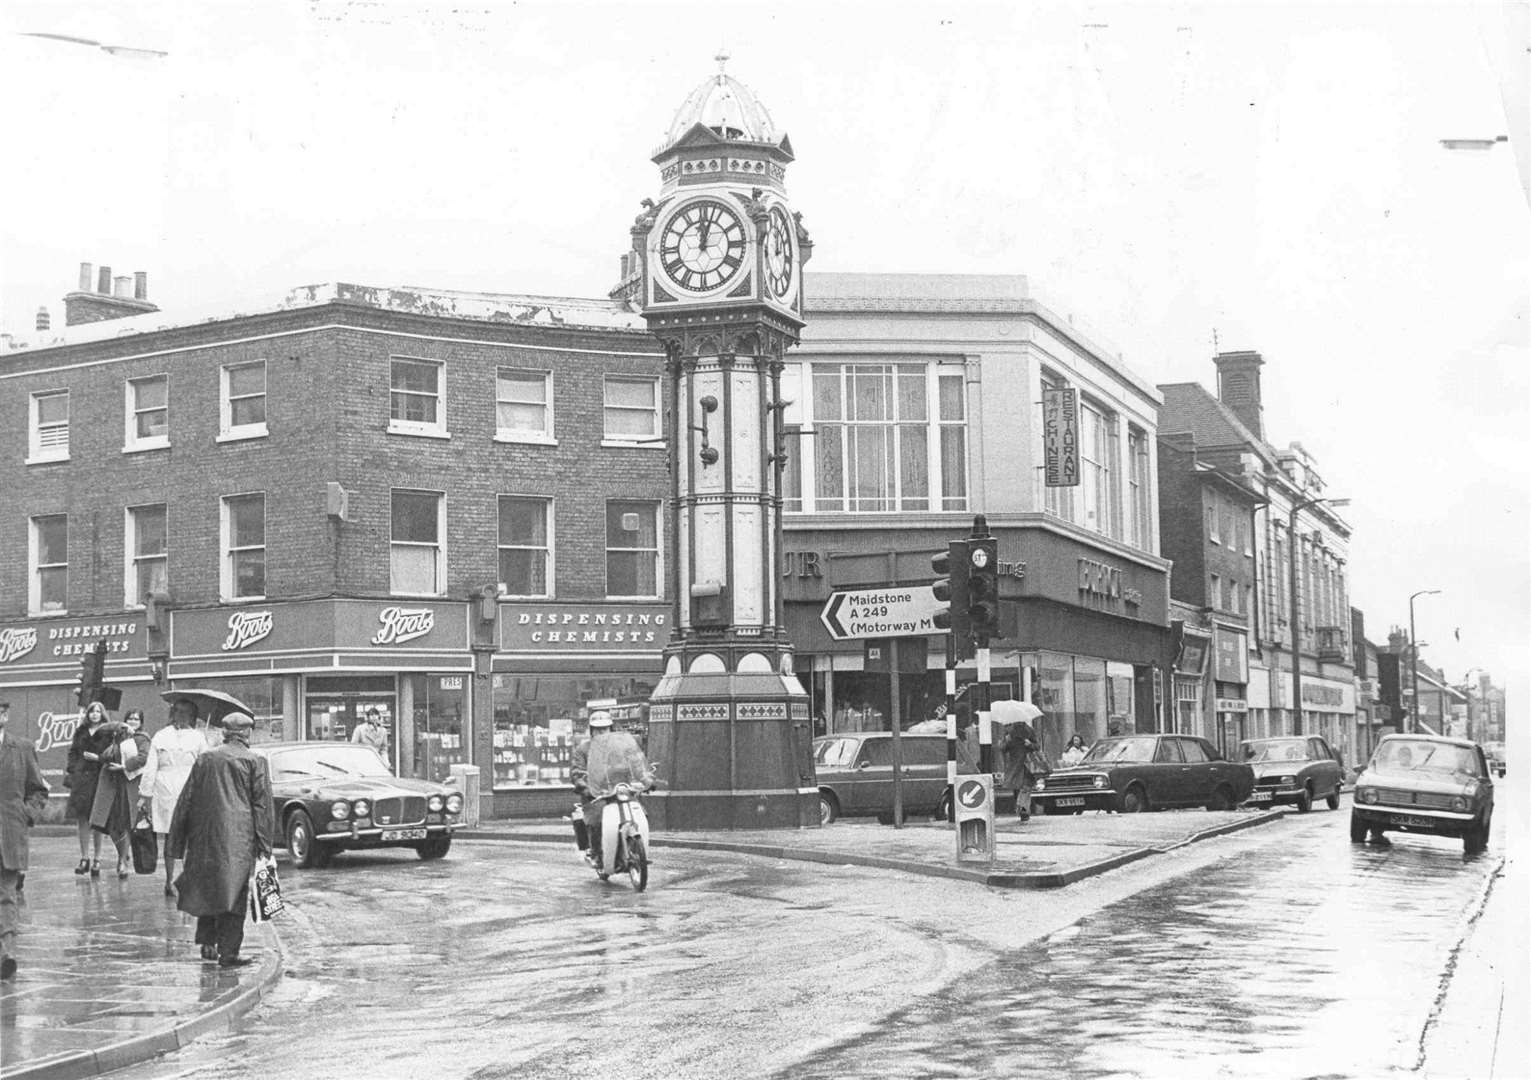 The clock tower in Sheerness High Street in March 1975